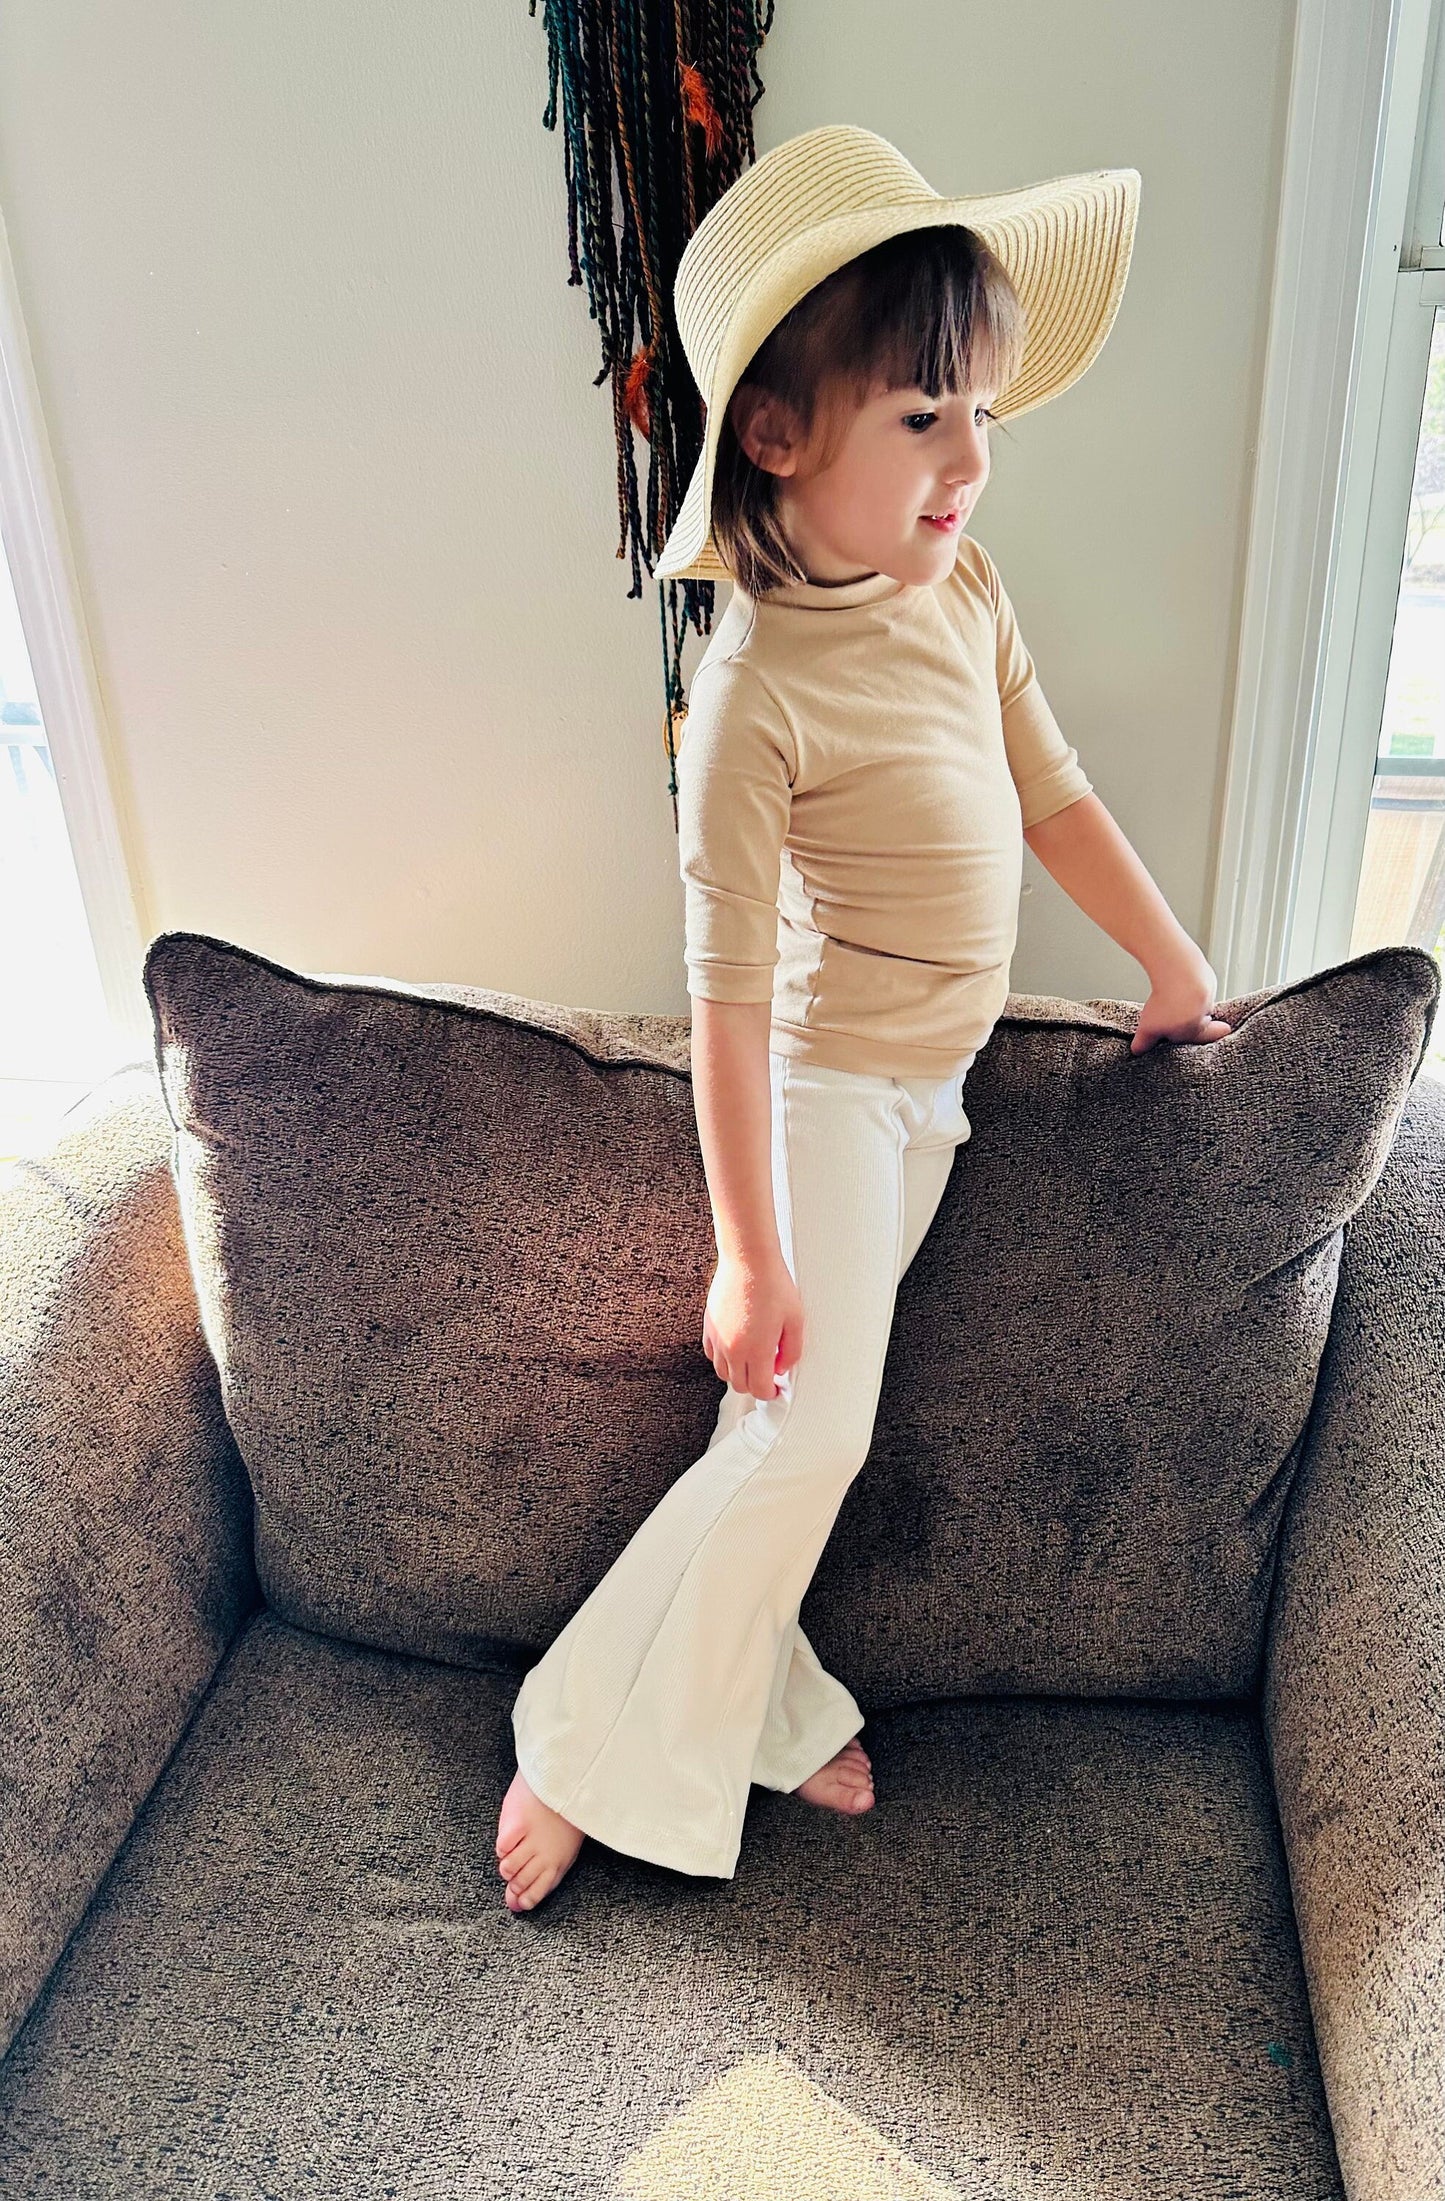 Ivory Corduroy Bells, 3/4 Sleeve shirt|Girls Spring/Summer Outfits|Girls Flare Bell Bottoms|Wholesome Goods Co